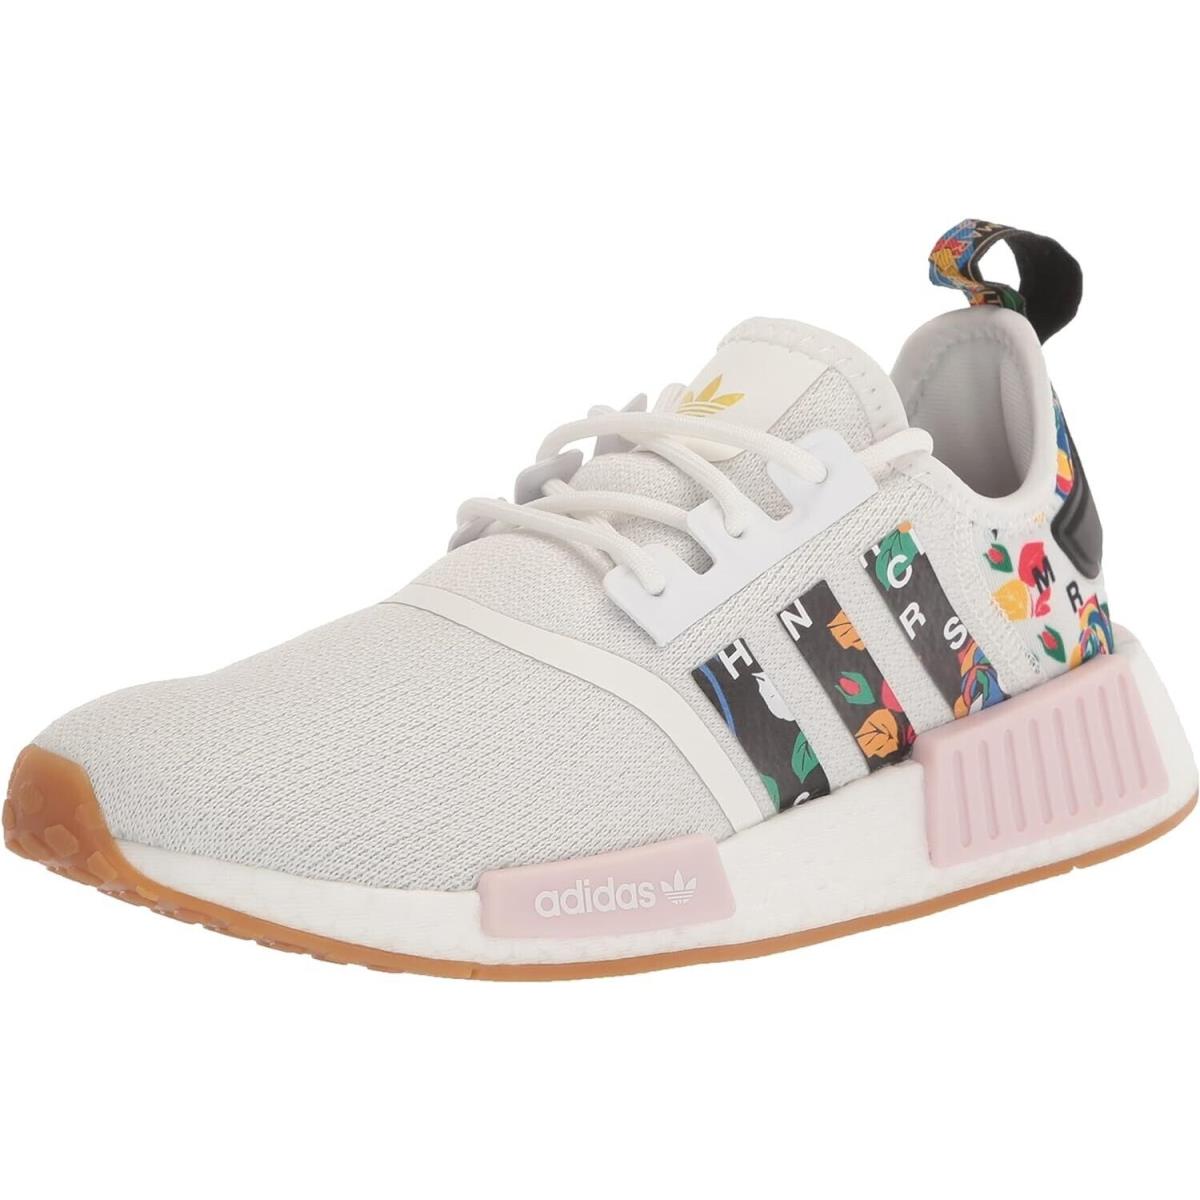 Adidas NMD_R1 Womens Running Shoes White/pink Size 8 - Pink